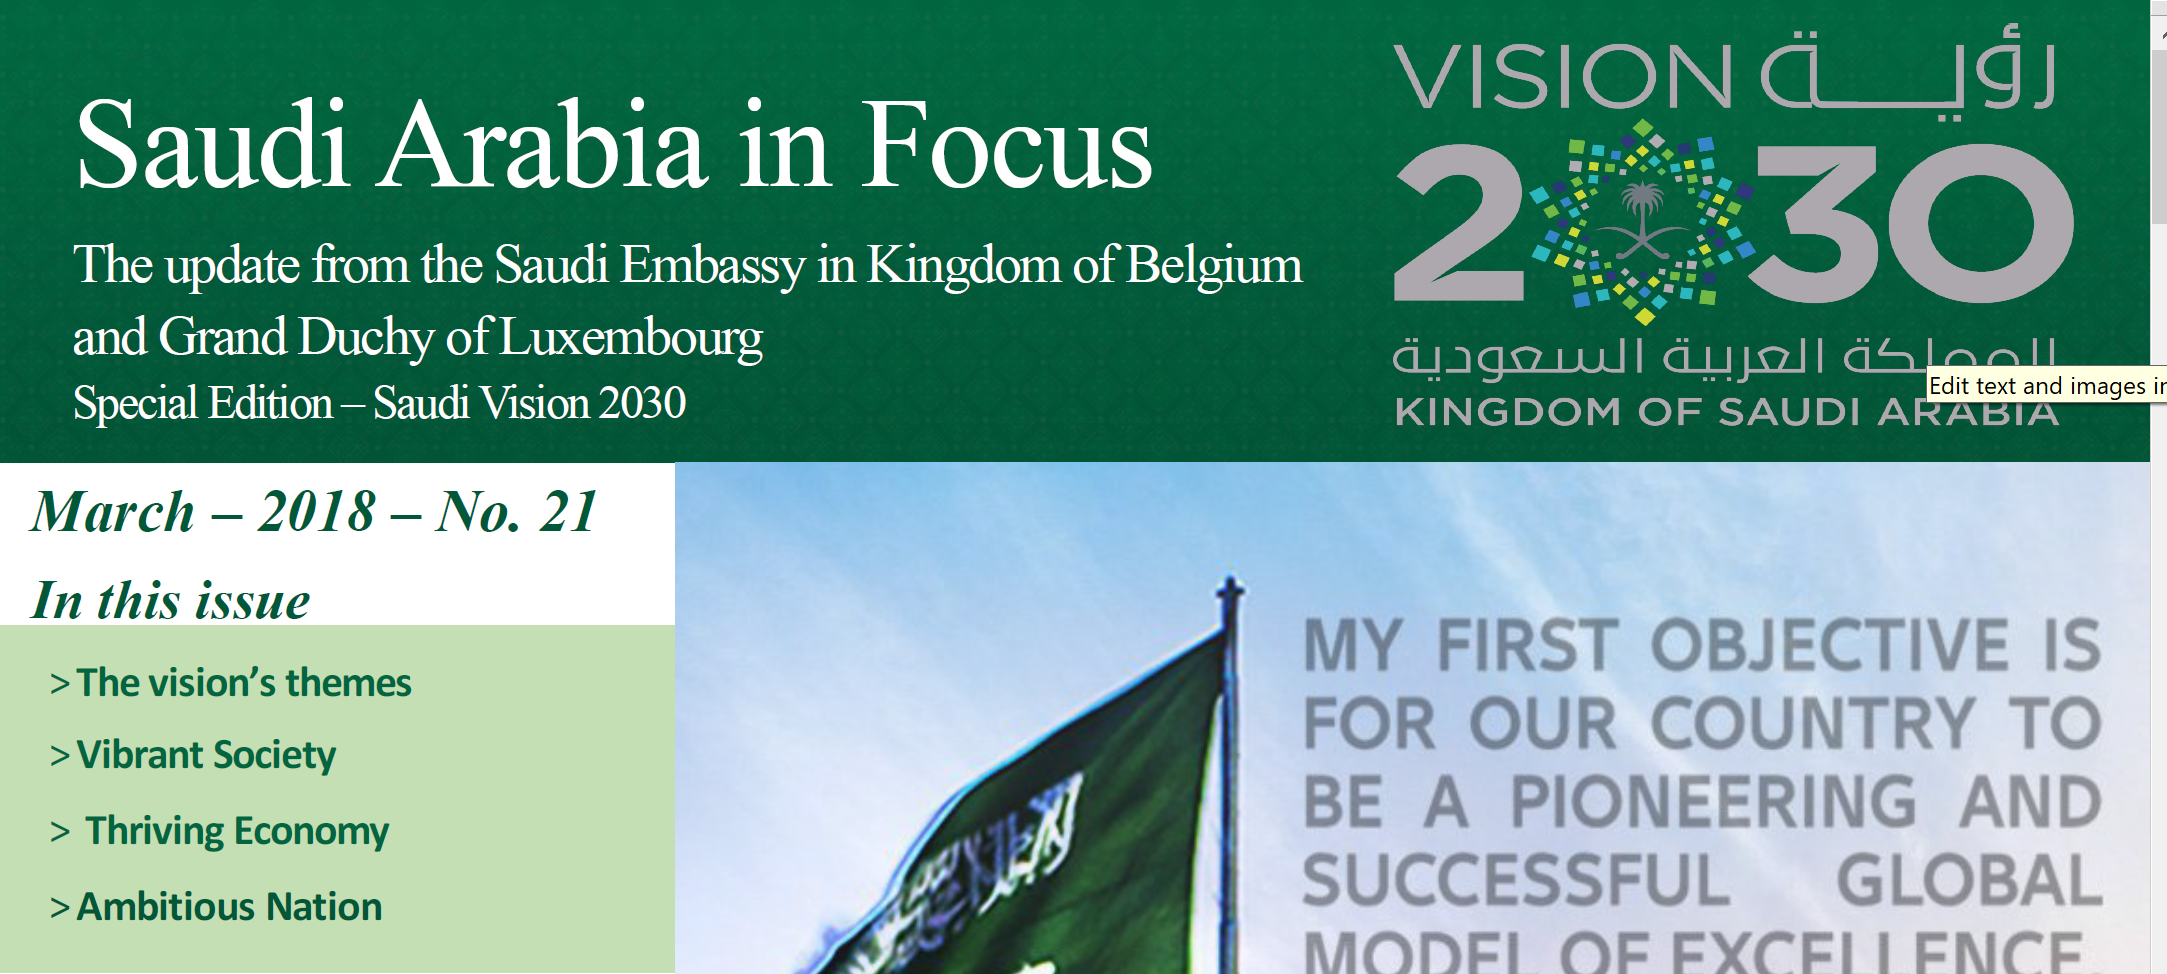 MARCH EDITION OF THE SAUDI ARABIA IN FOCUS NEWSLETTER